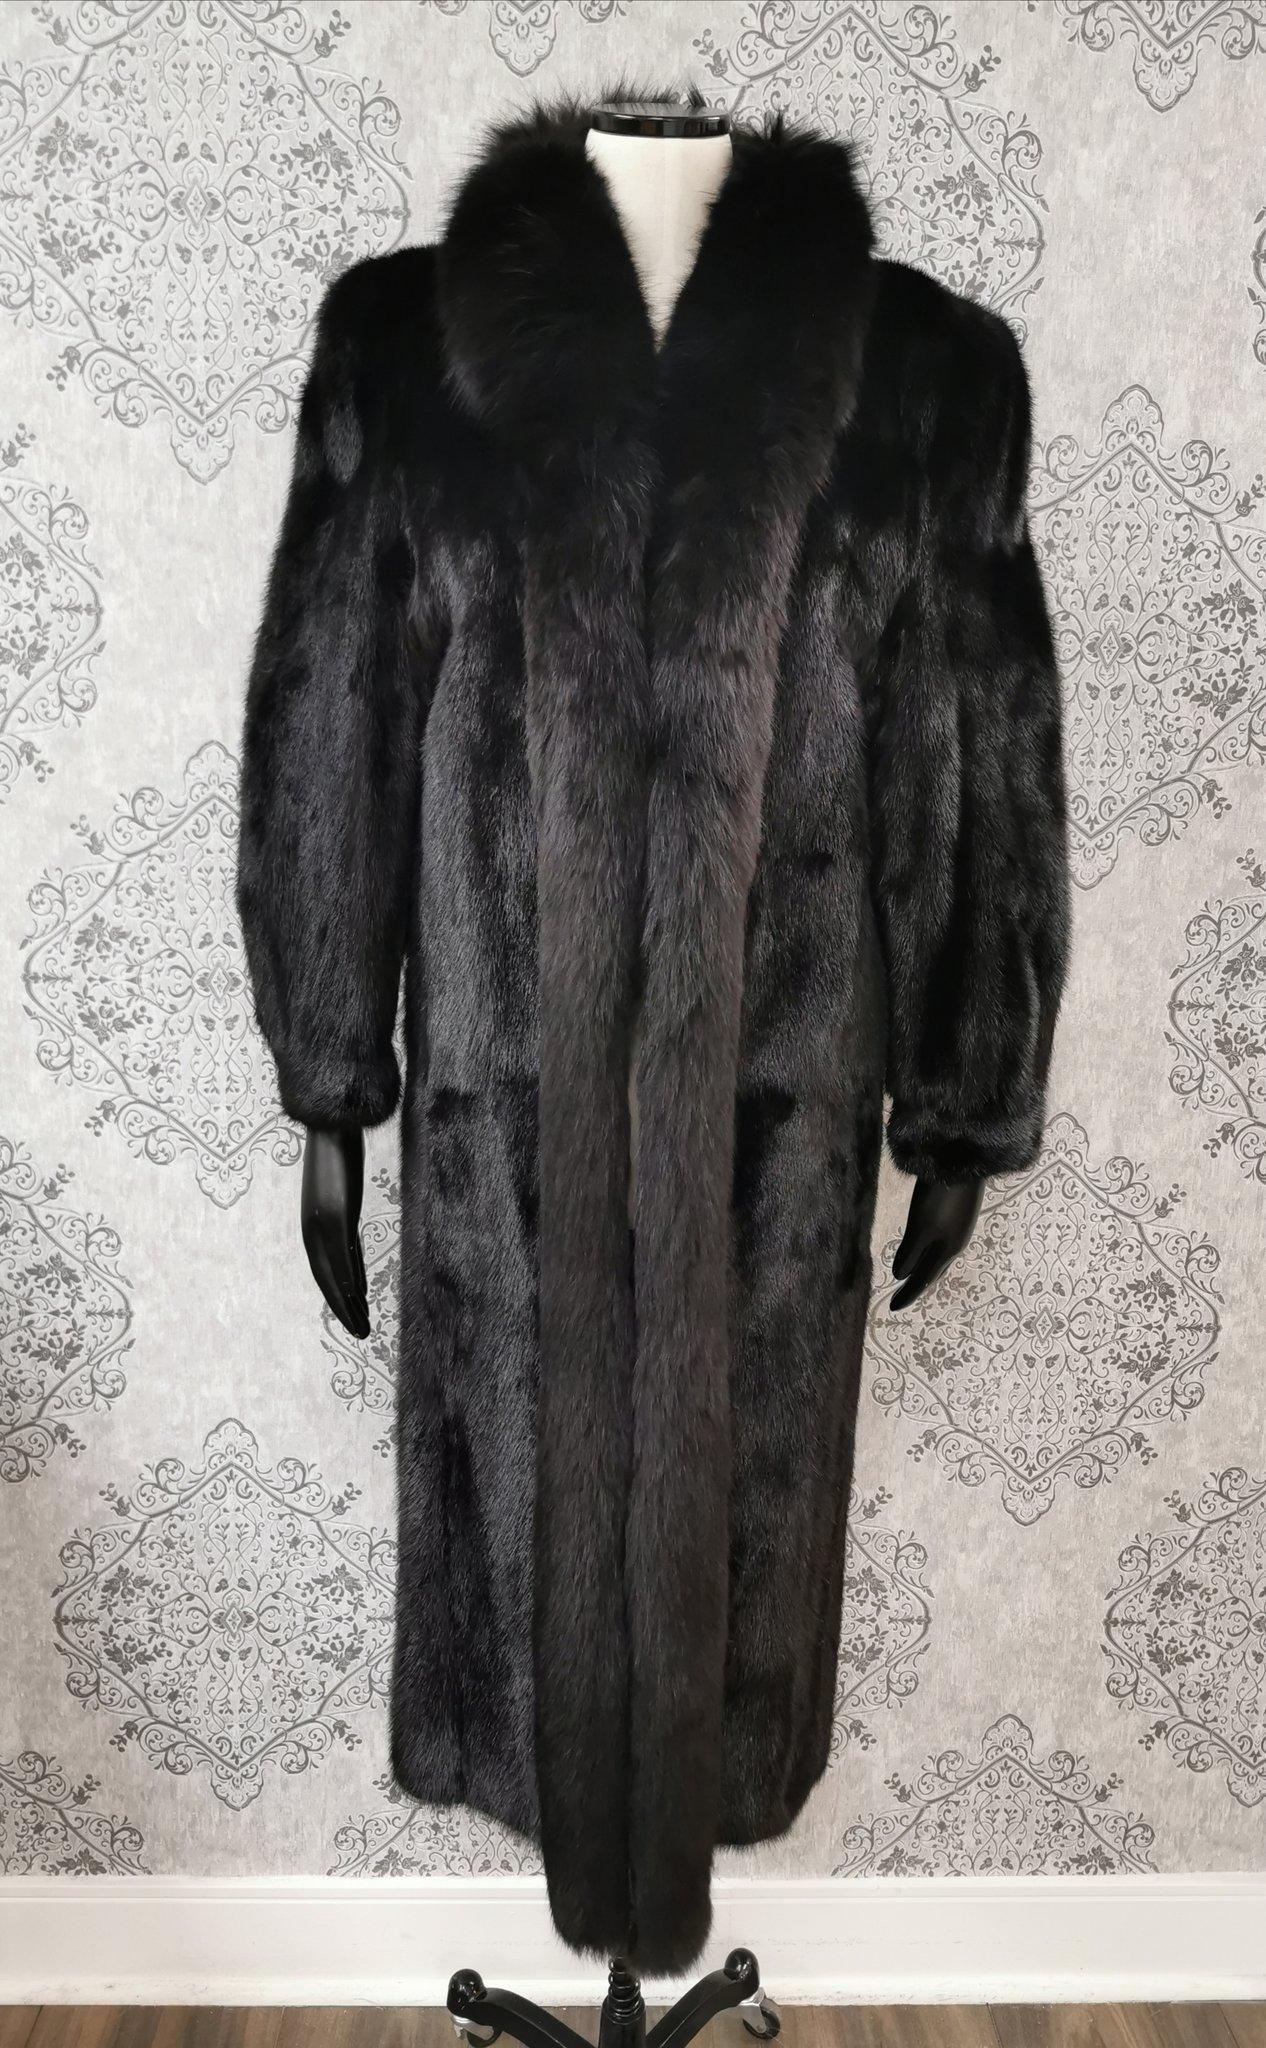 DESCRIPTION : 199 PITCH BLACK MINK FUR COAT WITH DYED SHADOW FOX TRIM SIZE 8

Tuxedo collar, supple skins,beautiful fresh fur, european german clasps for closure, too slit pockets, nice big full pelts skins in excellent condition.

Brand : Eaton